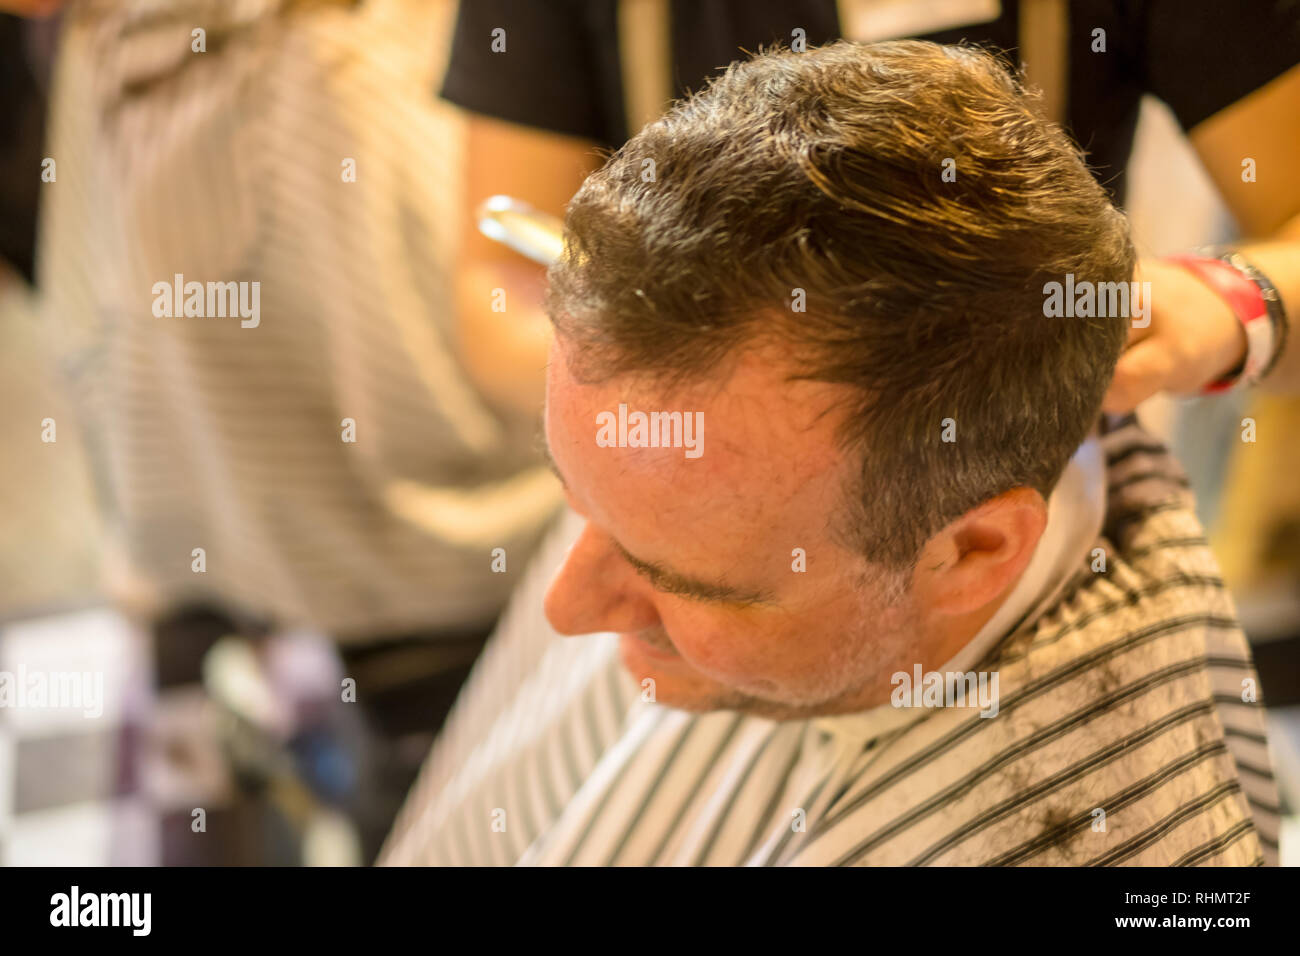 Guy Getting Haircut By Hairdresser Stock Photo 234641863